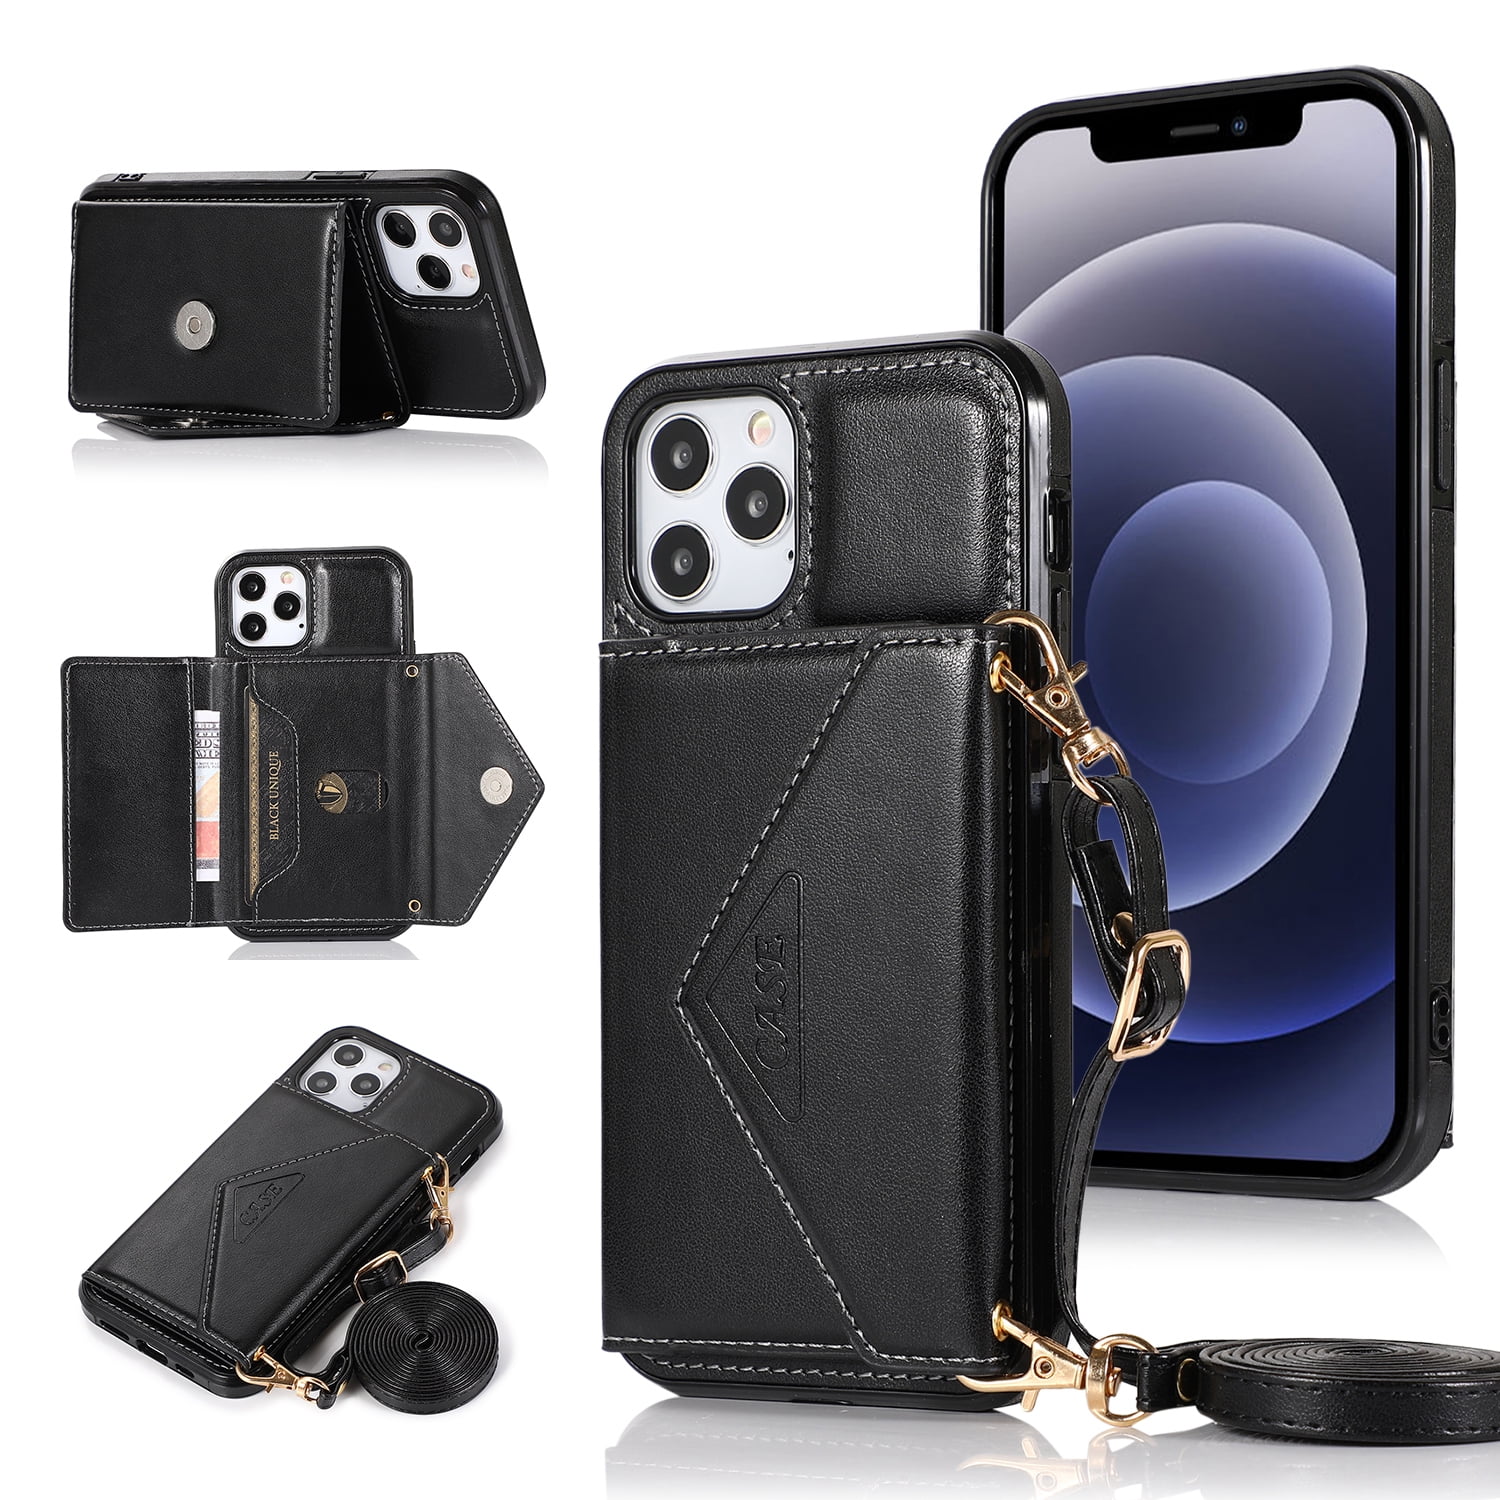 Xpression Mobile for Apple iPhone 11 Pro Max Wallet Case Credit Card ID Money Holder Lanyard Detachable Neck Strap Protective Flip PU Leather Cover ,Xpm Phone Case [